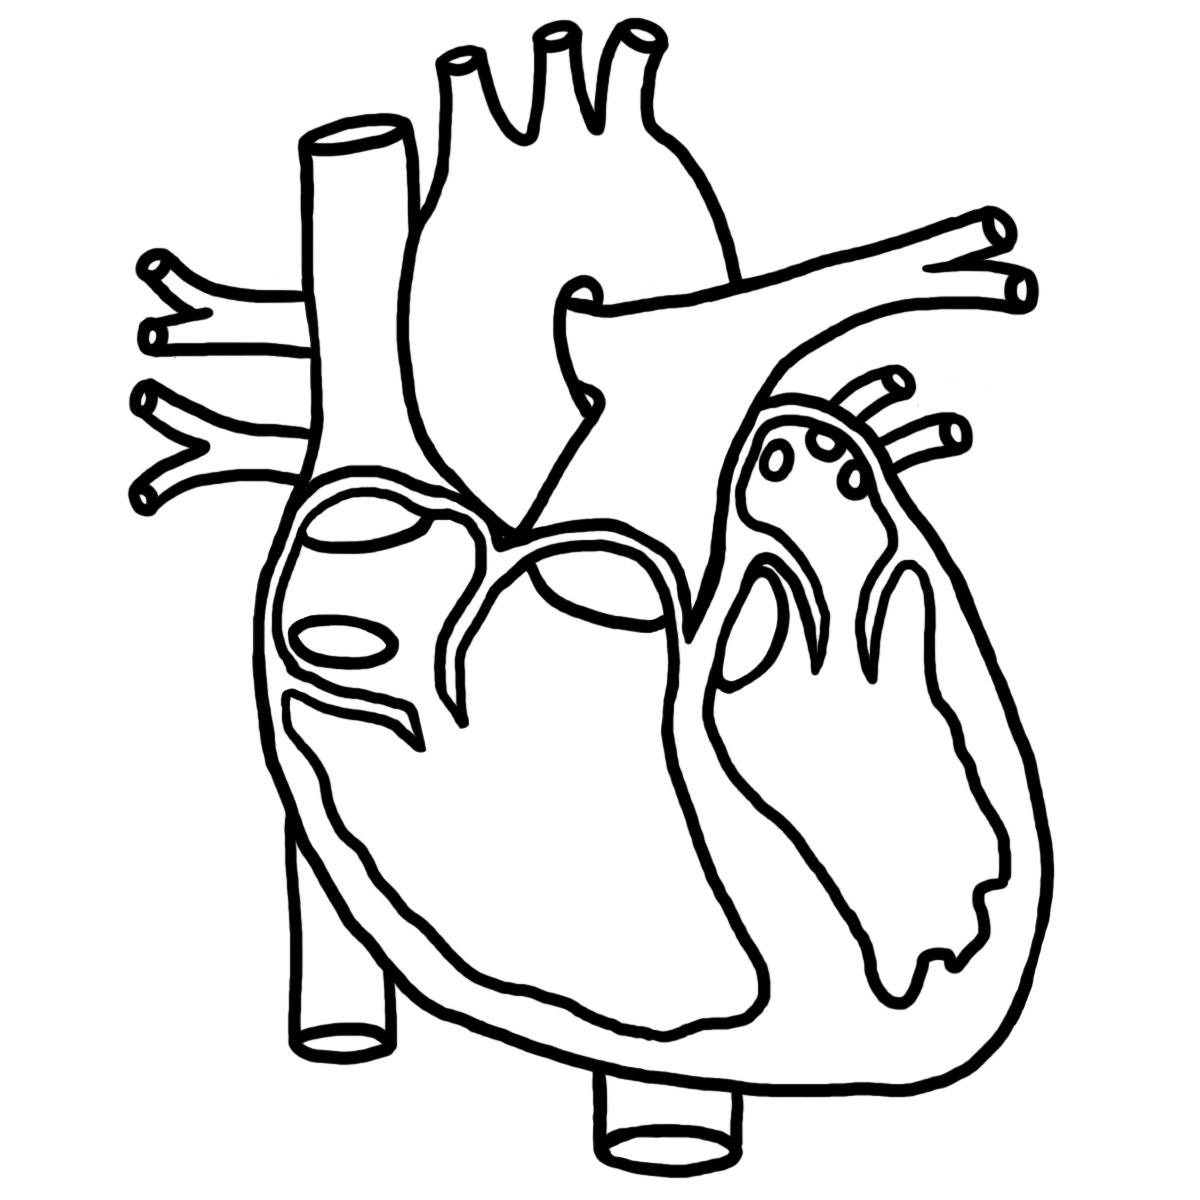 Clipart heart science. Cliparts zone 